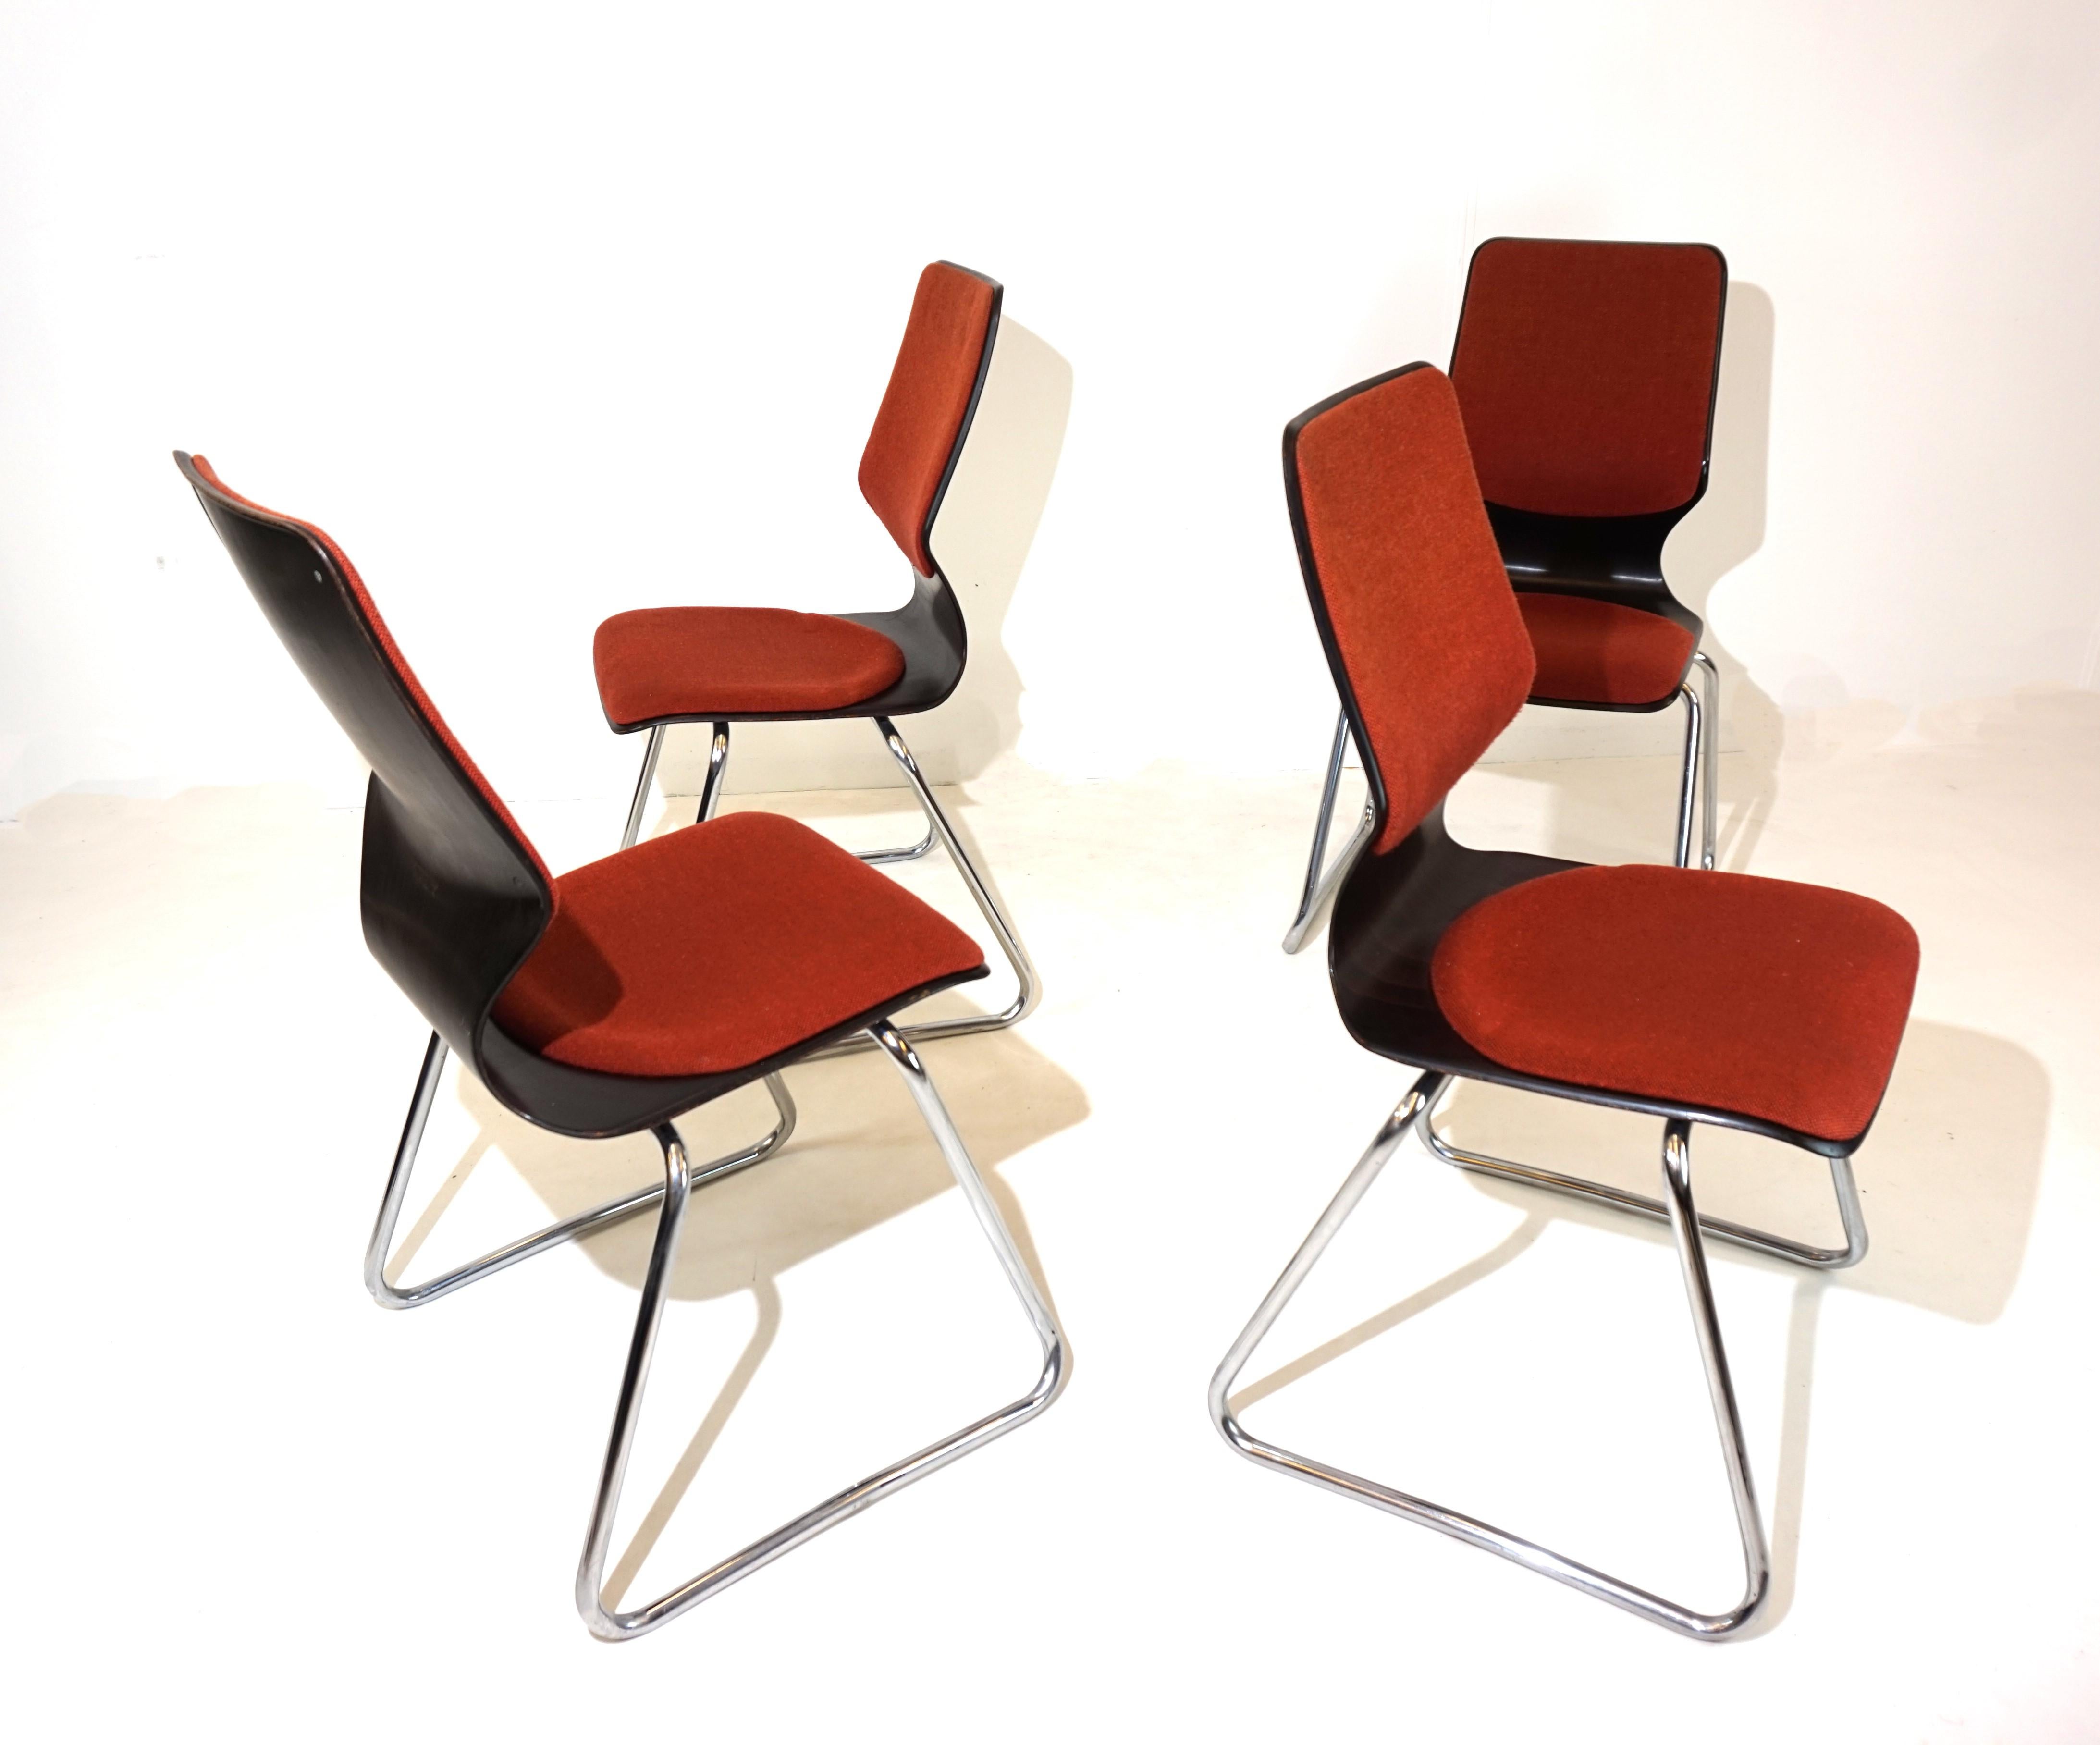 Flötotto set of 4 Pagholz chairs by Elmar Flötotto For Sale 5